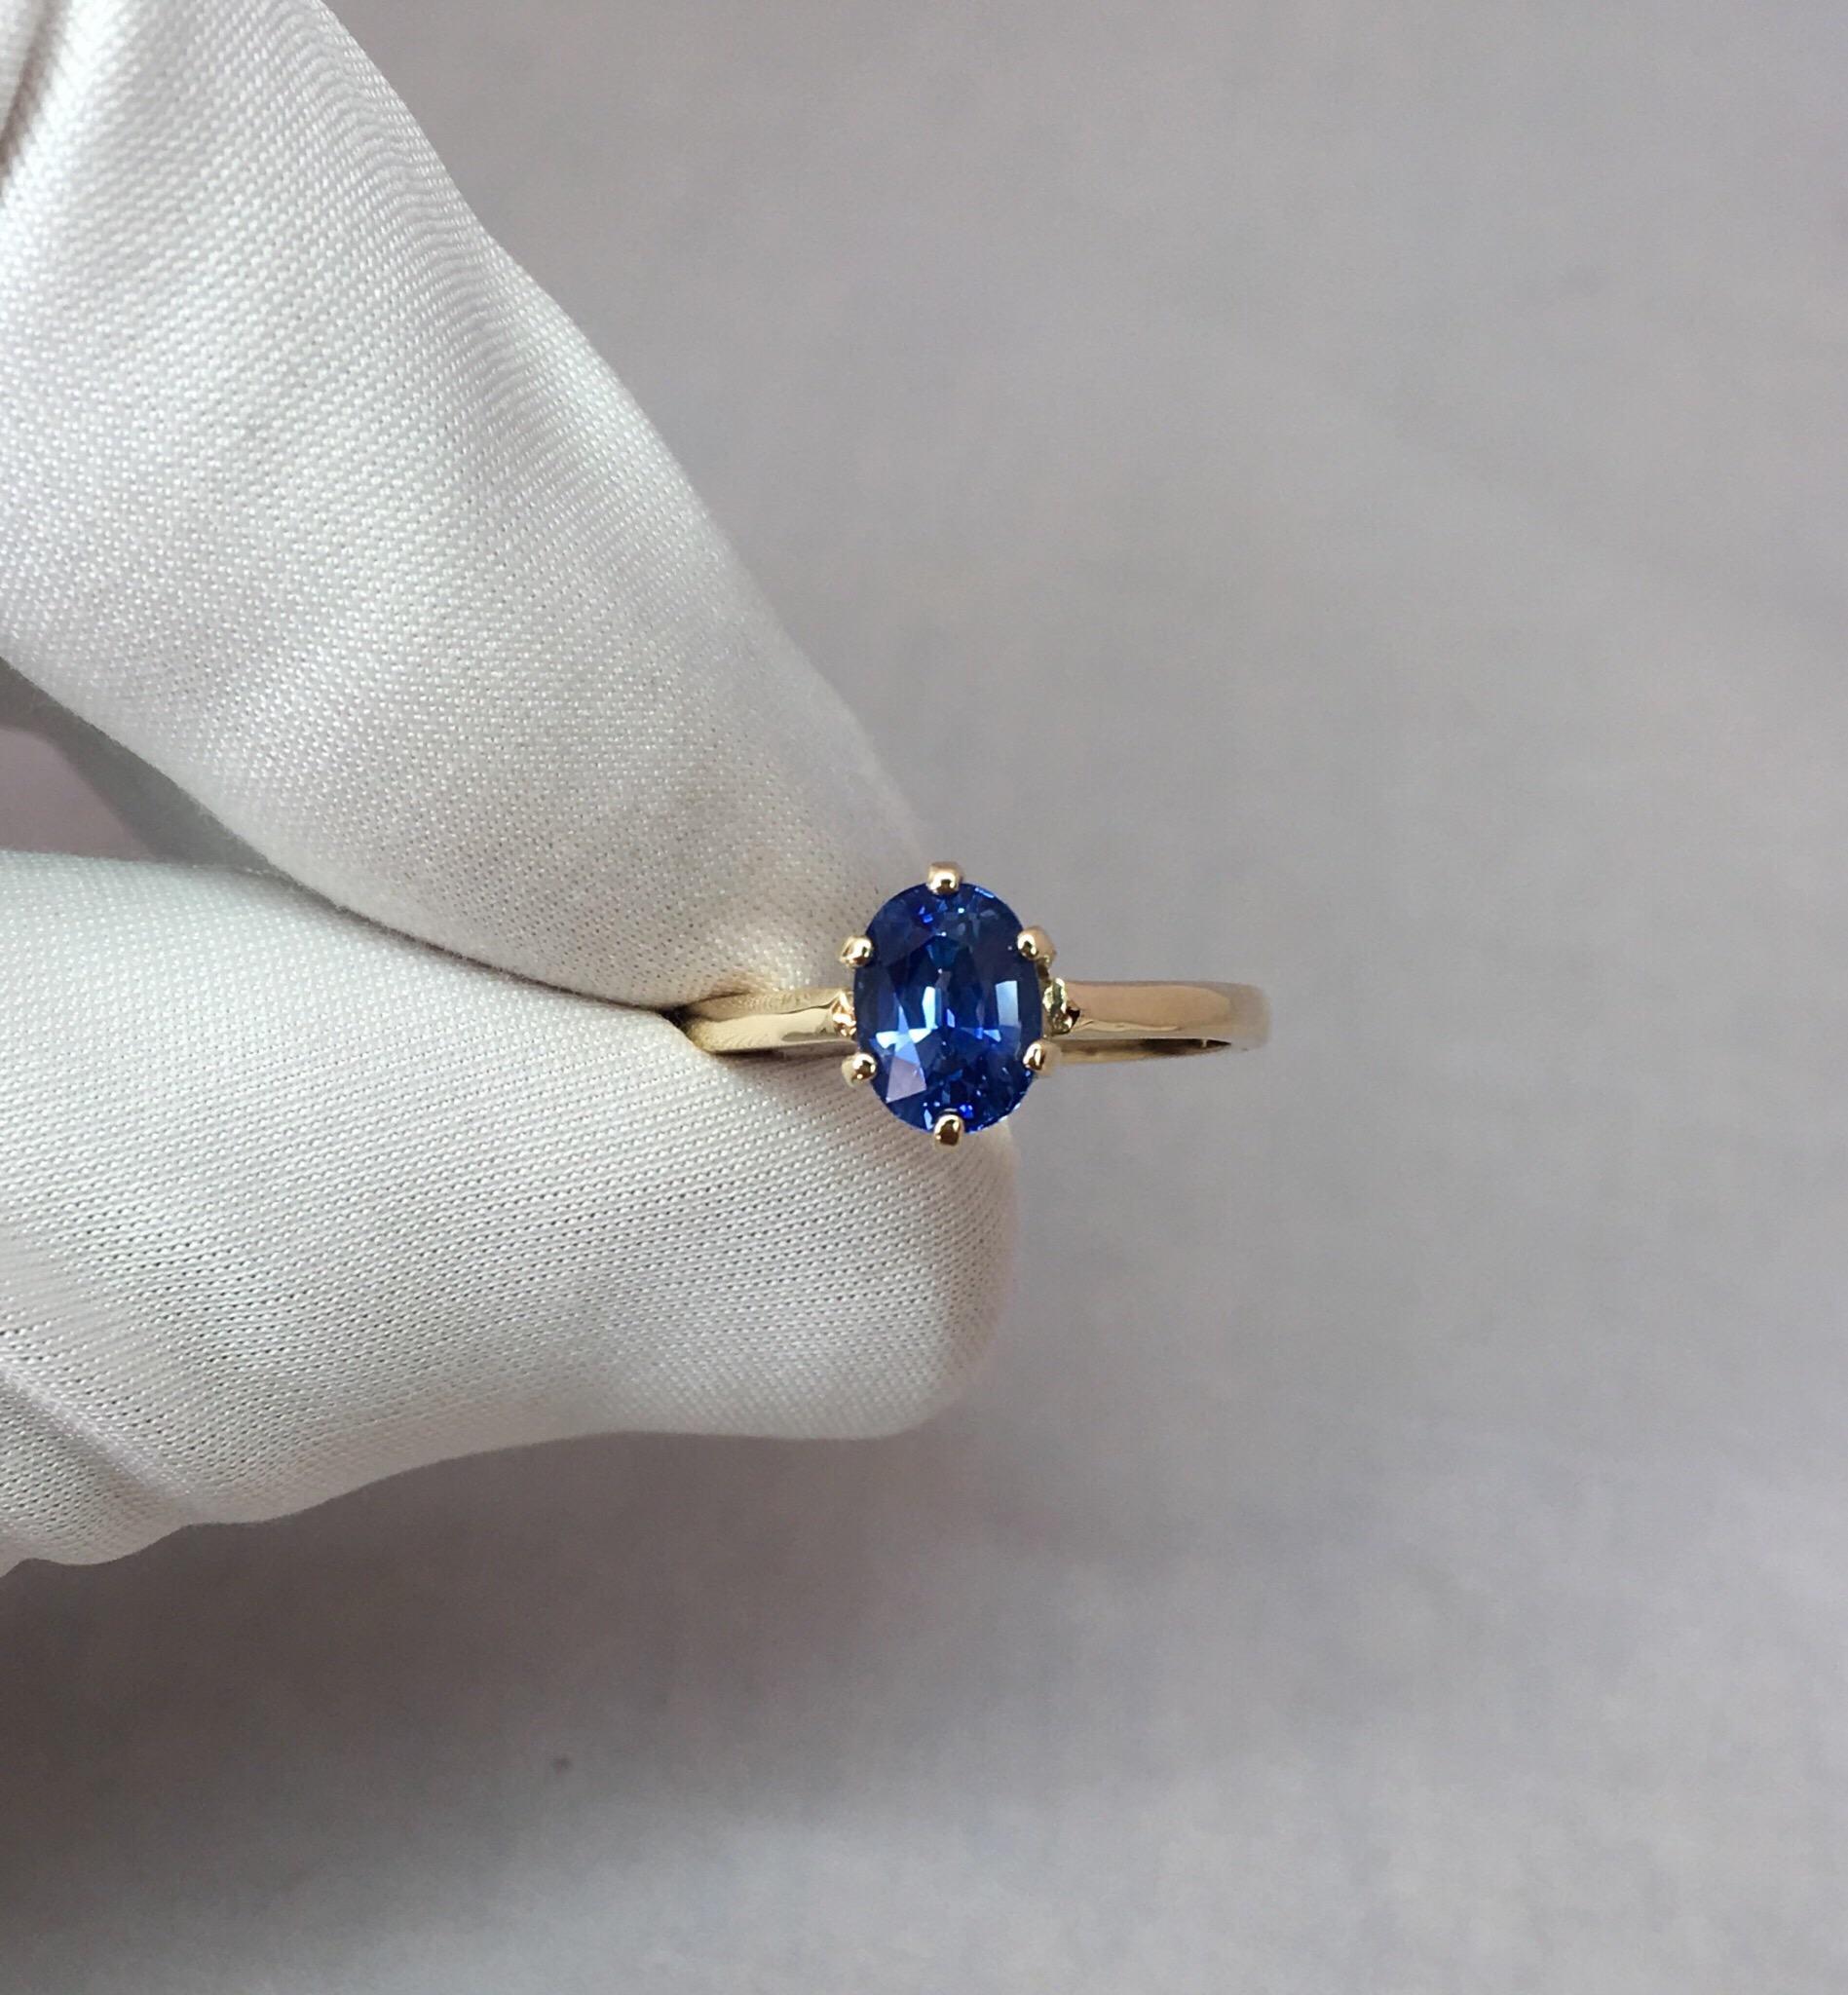 Women's or Men's Ceylon Blue Sapphire 1.75 Carat Yellow Gold Oval Cut Solitaire Ring